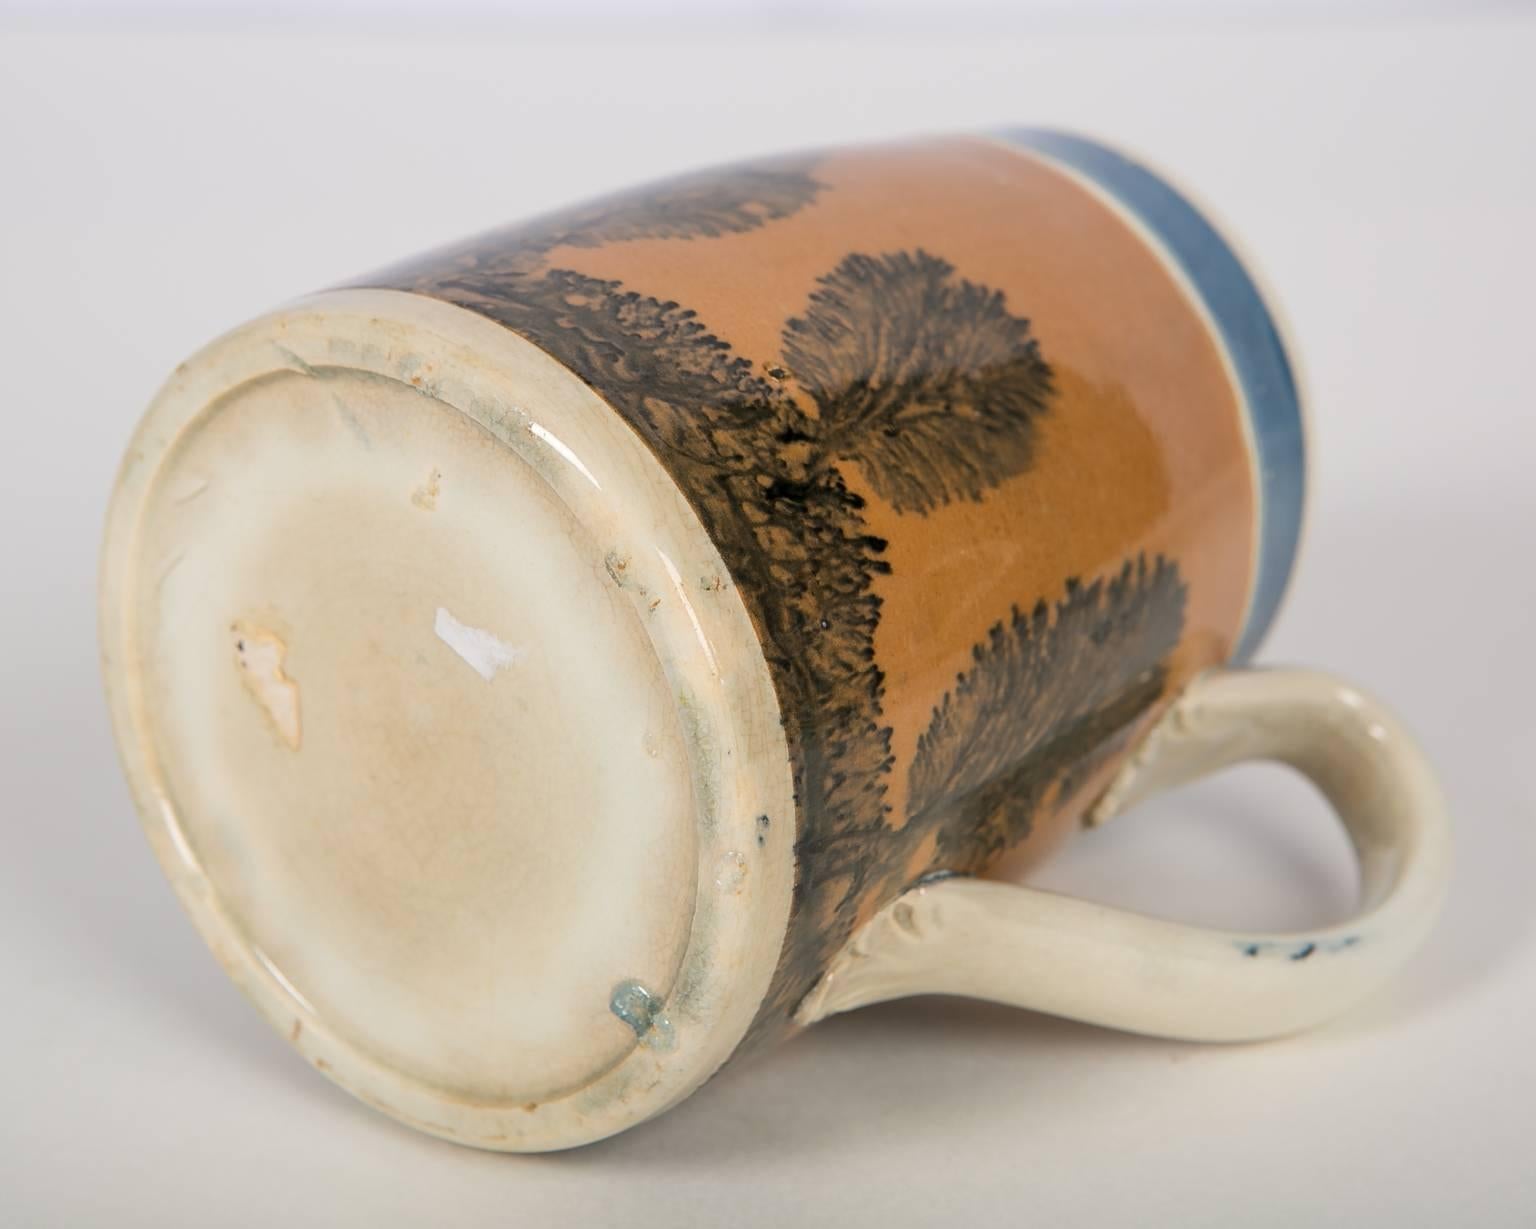 A Mochaware half pint mug molded in an elegant shape with a wide band of burnt orange slip decorated with vertical tree-like dendritic designs. The 